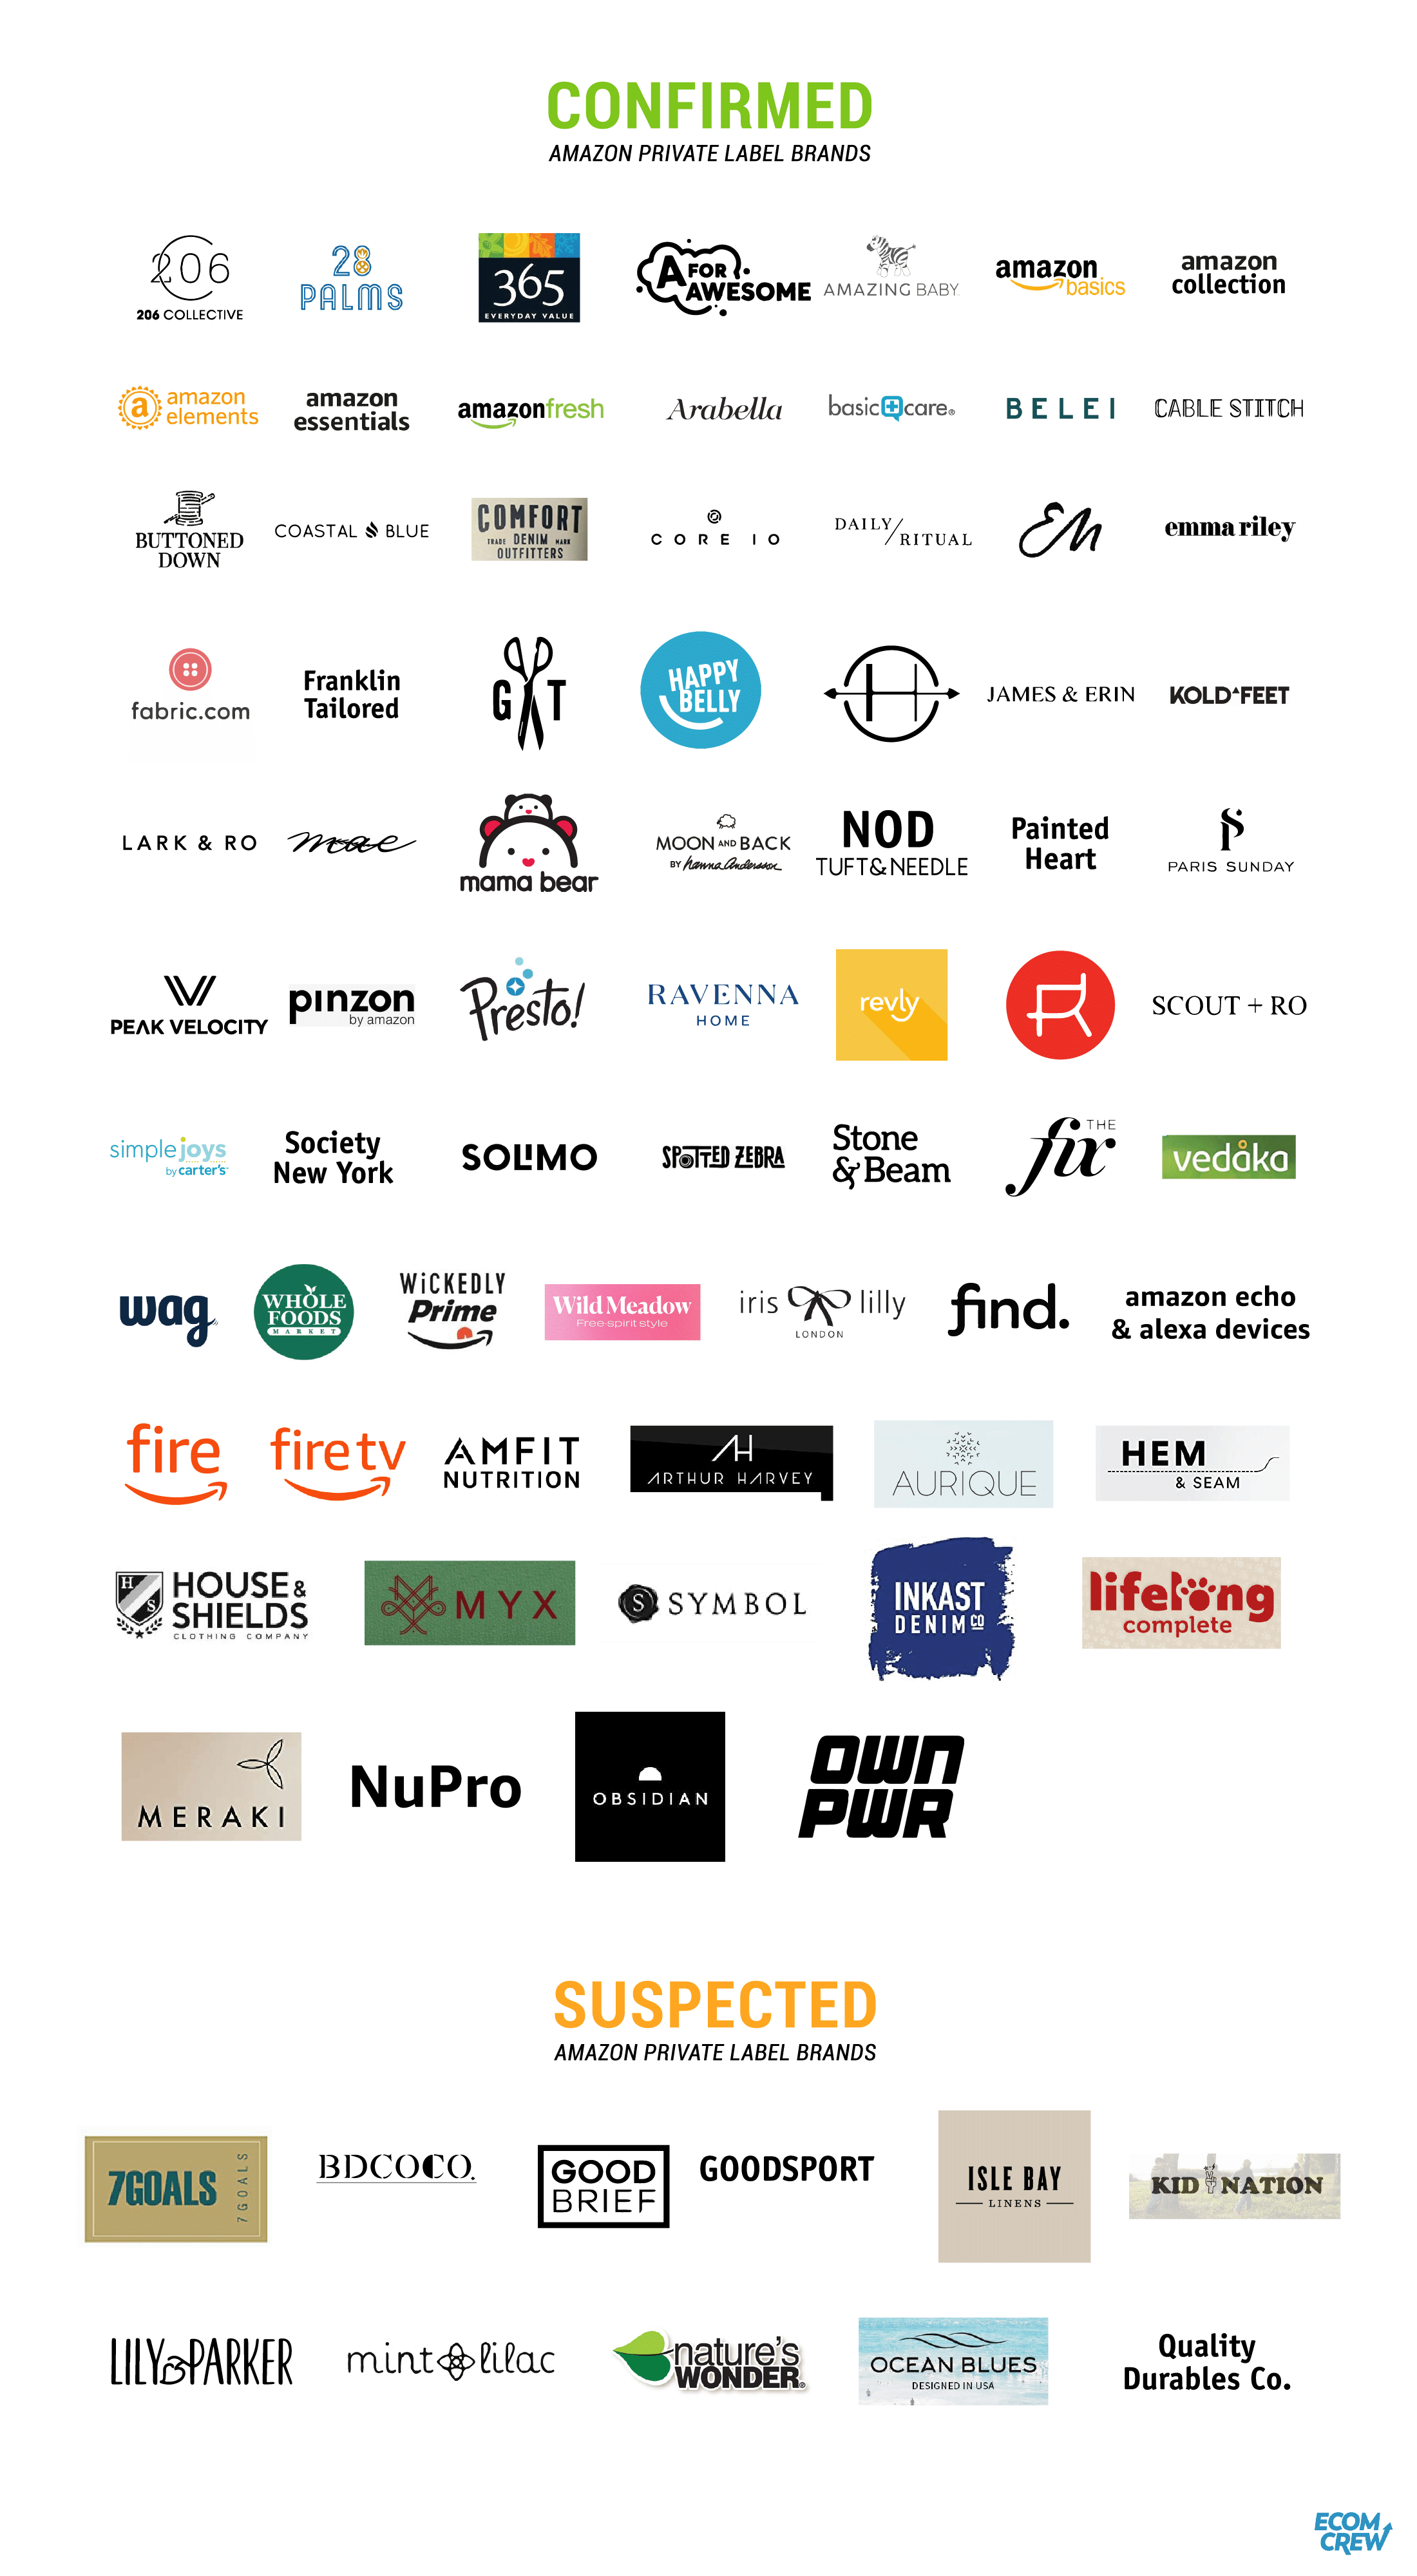 The Complete Guide to 's Private Label Brands